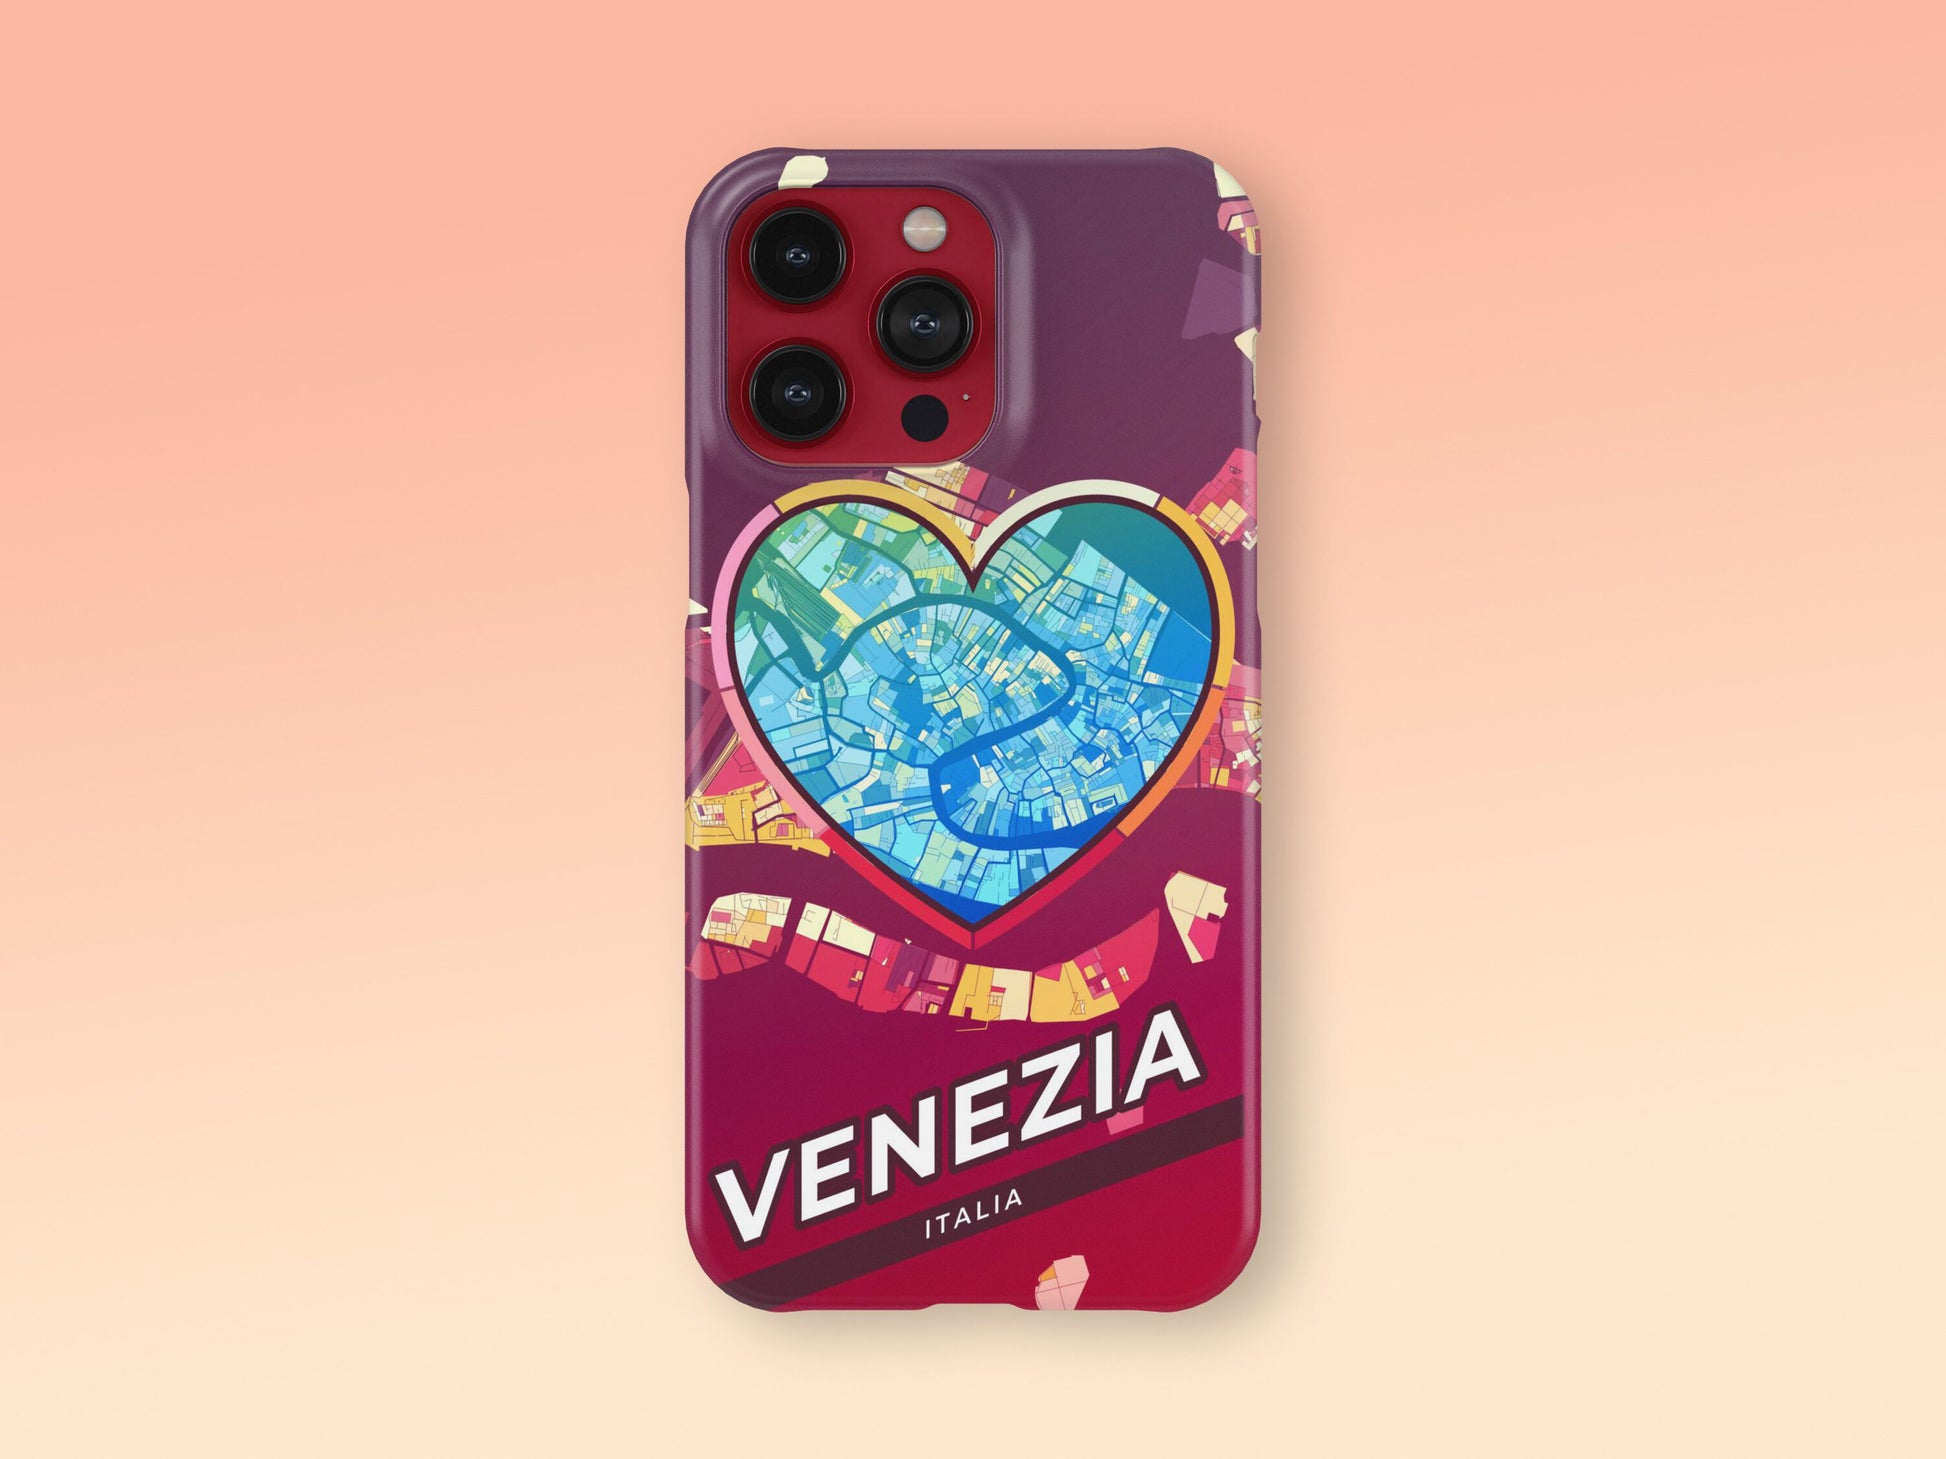 Venice Italy slim phone case with colorful icon 2